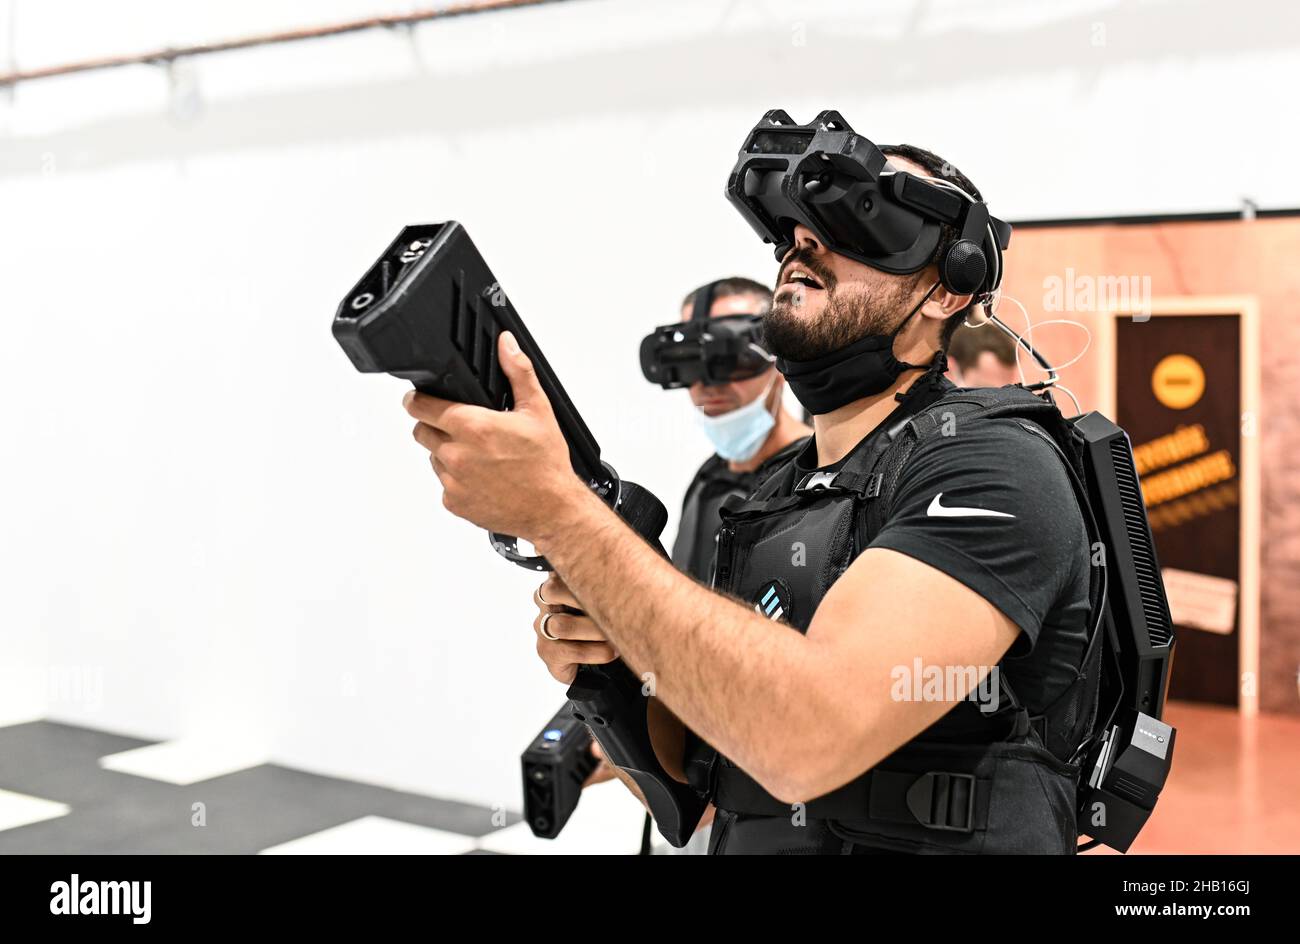 Activities in the business park “OL Vallee Arena” in Decines (central-eastern France): Vortex Experience VR, 'Zombies” mission,fully-immersive virtual Stock Photo